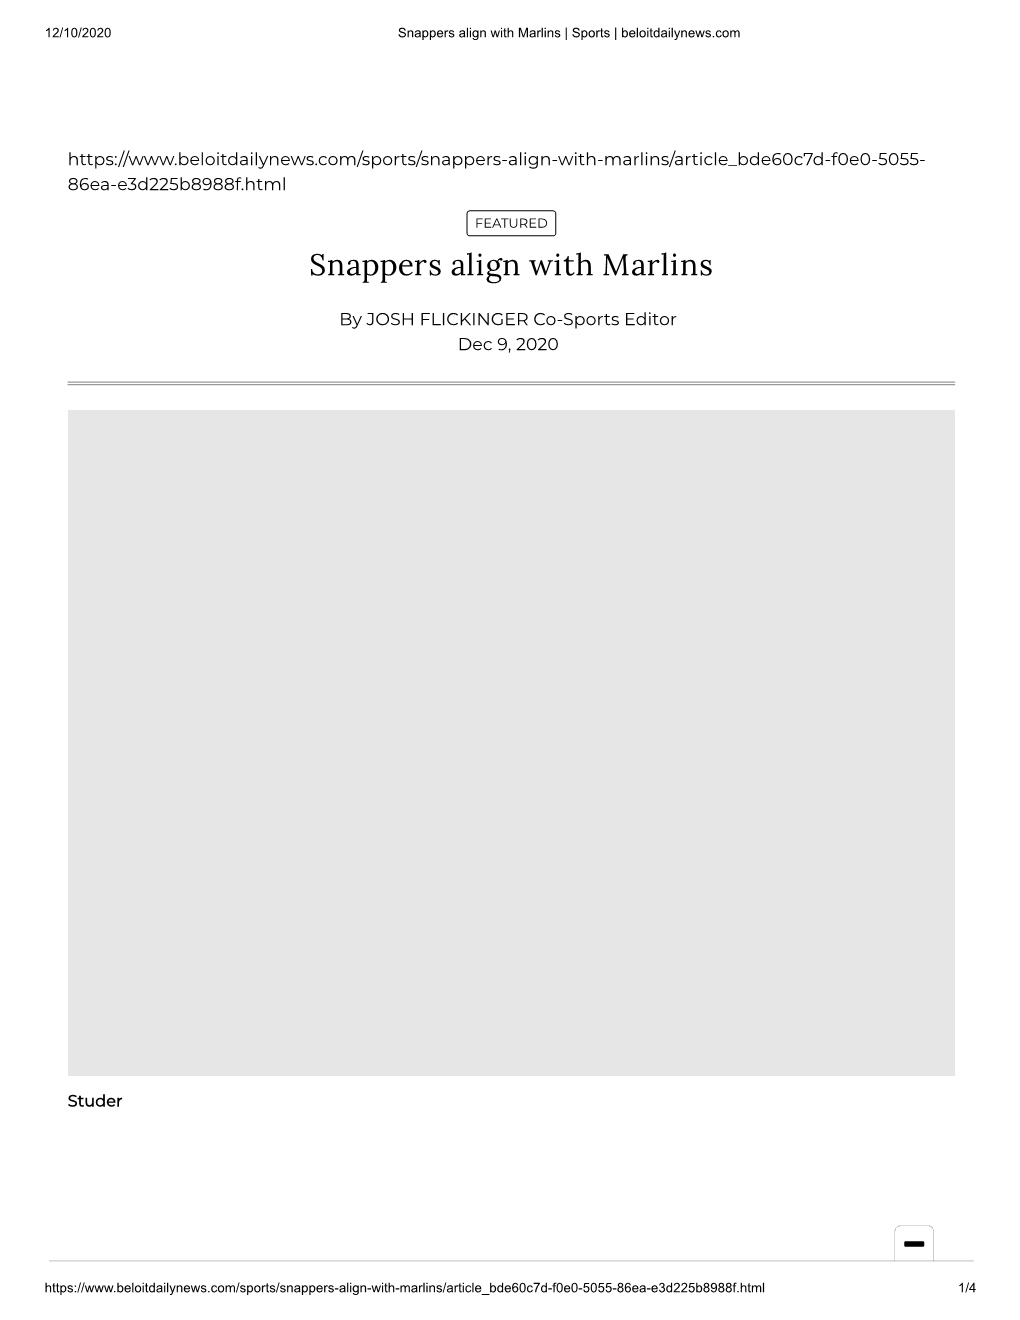 12-09-20-BDN-Snappers Align with Marlins